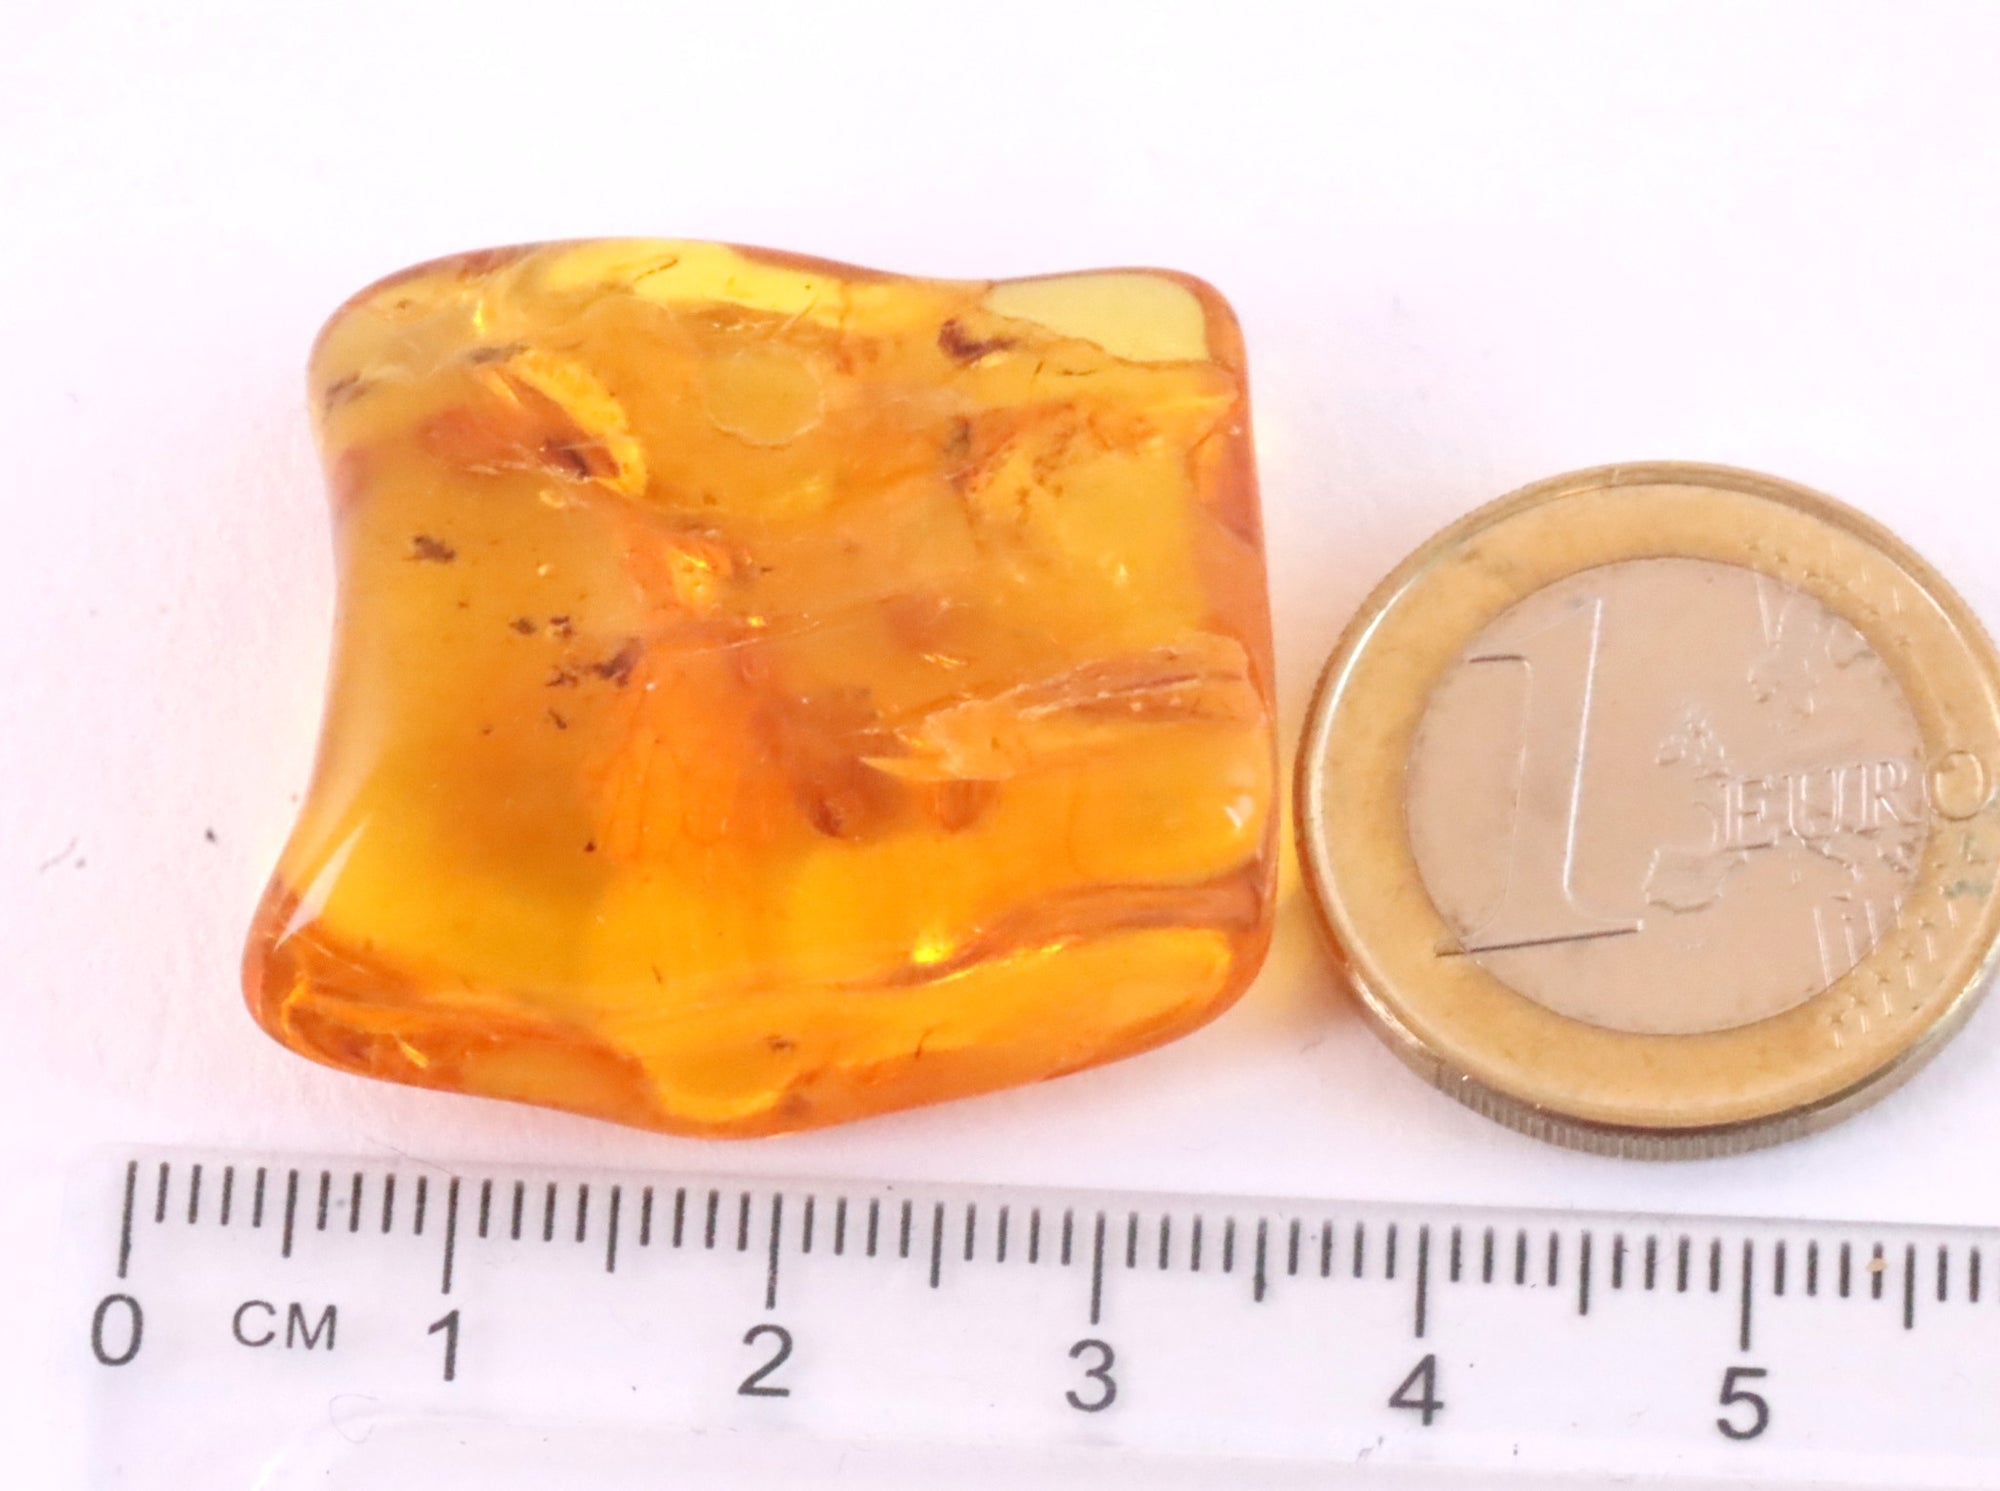 40 Million year Old Baltic Amber With Insect Inclusion